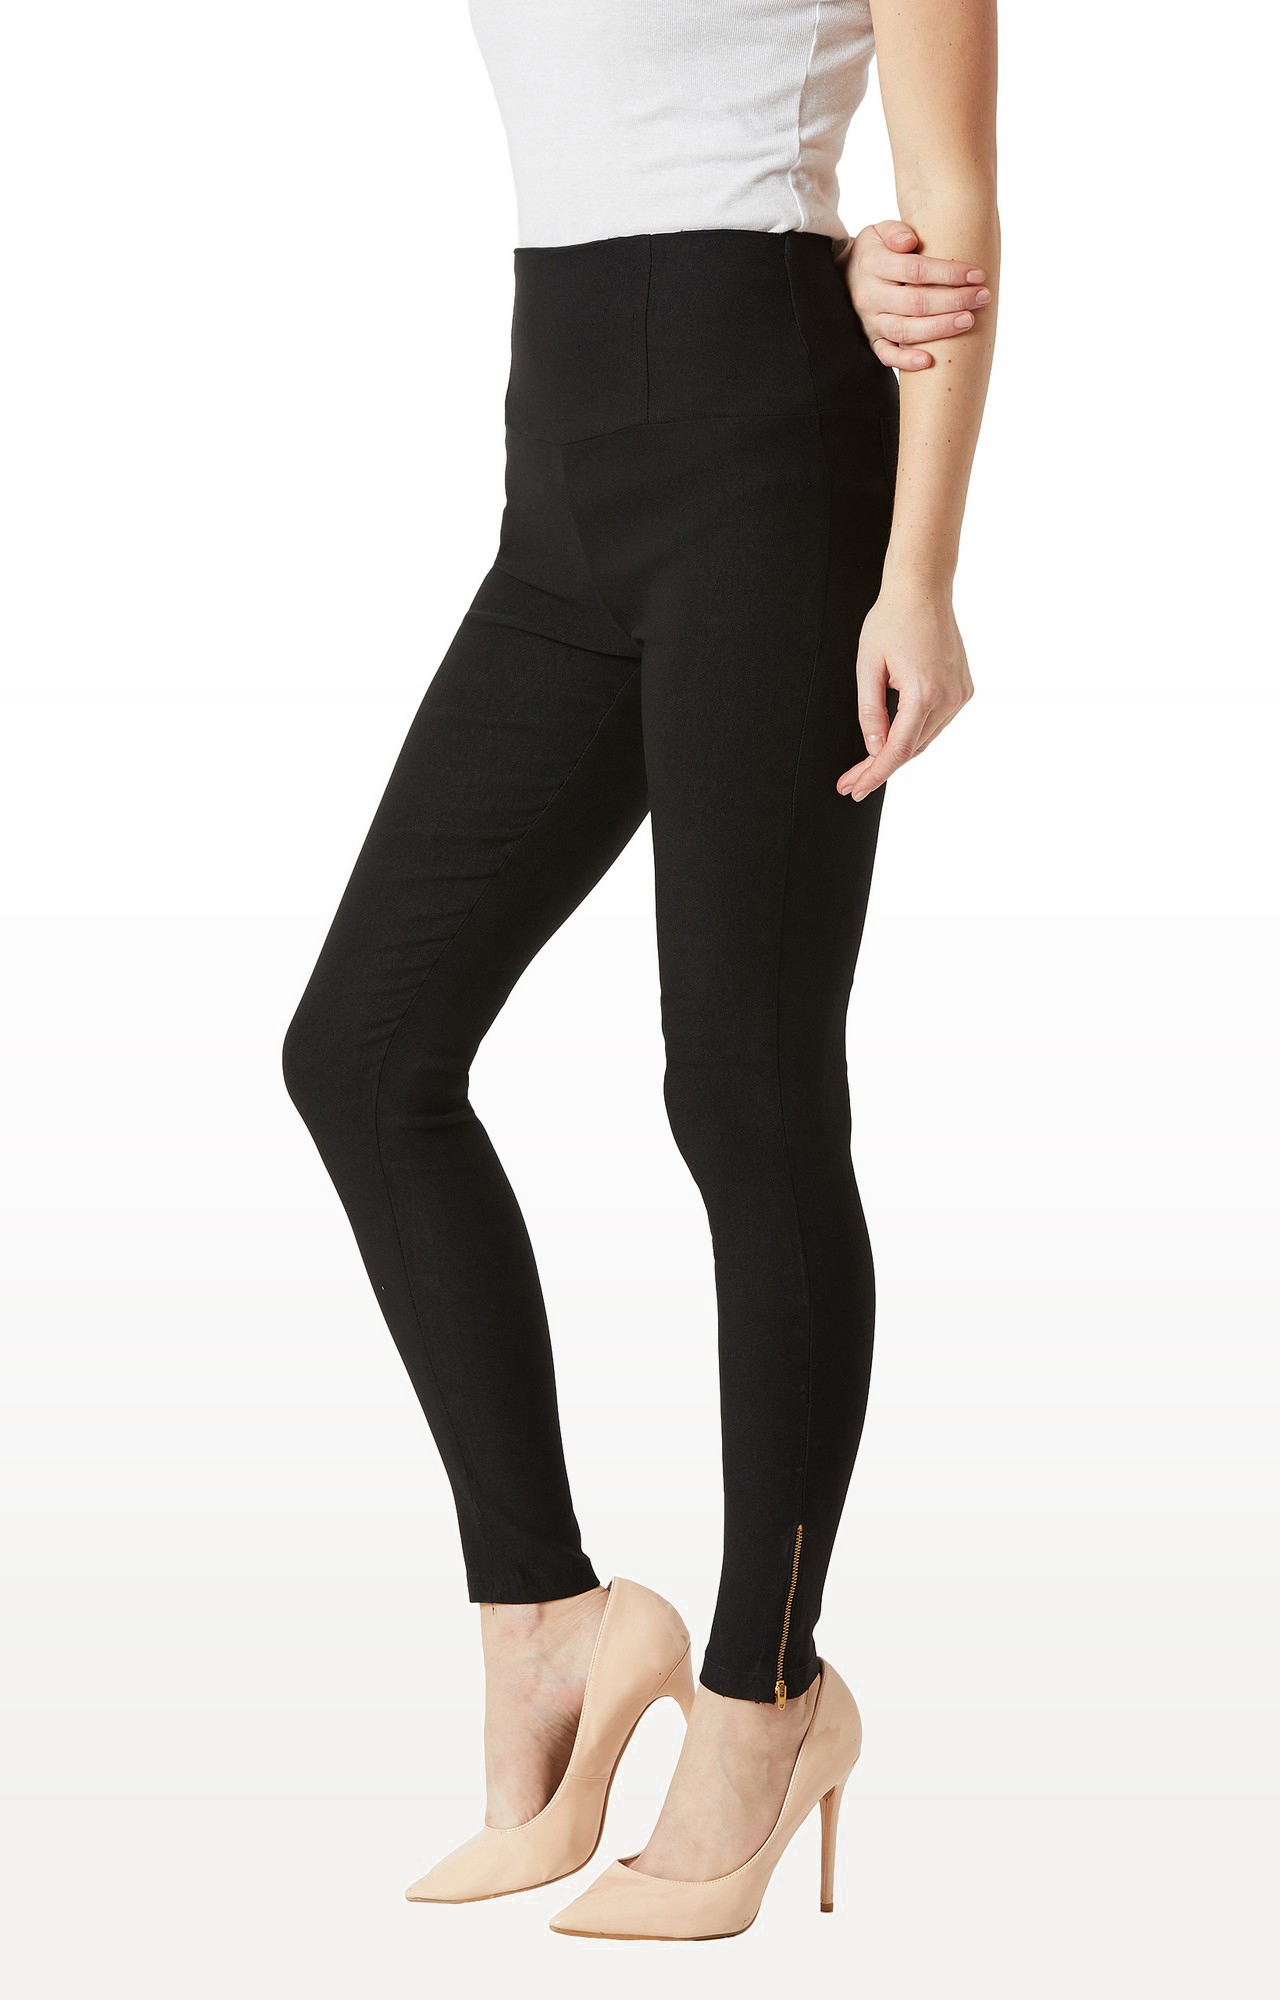 MISS CHASE | Women's Black Solid Jeggings 2